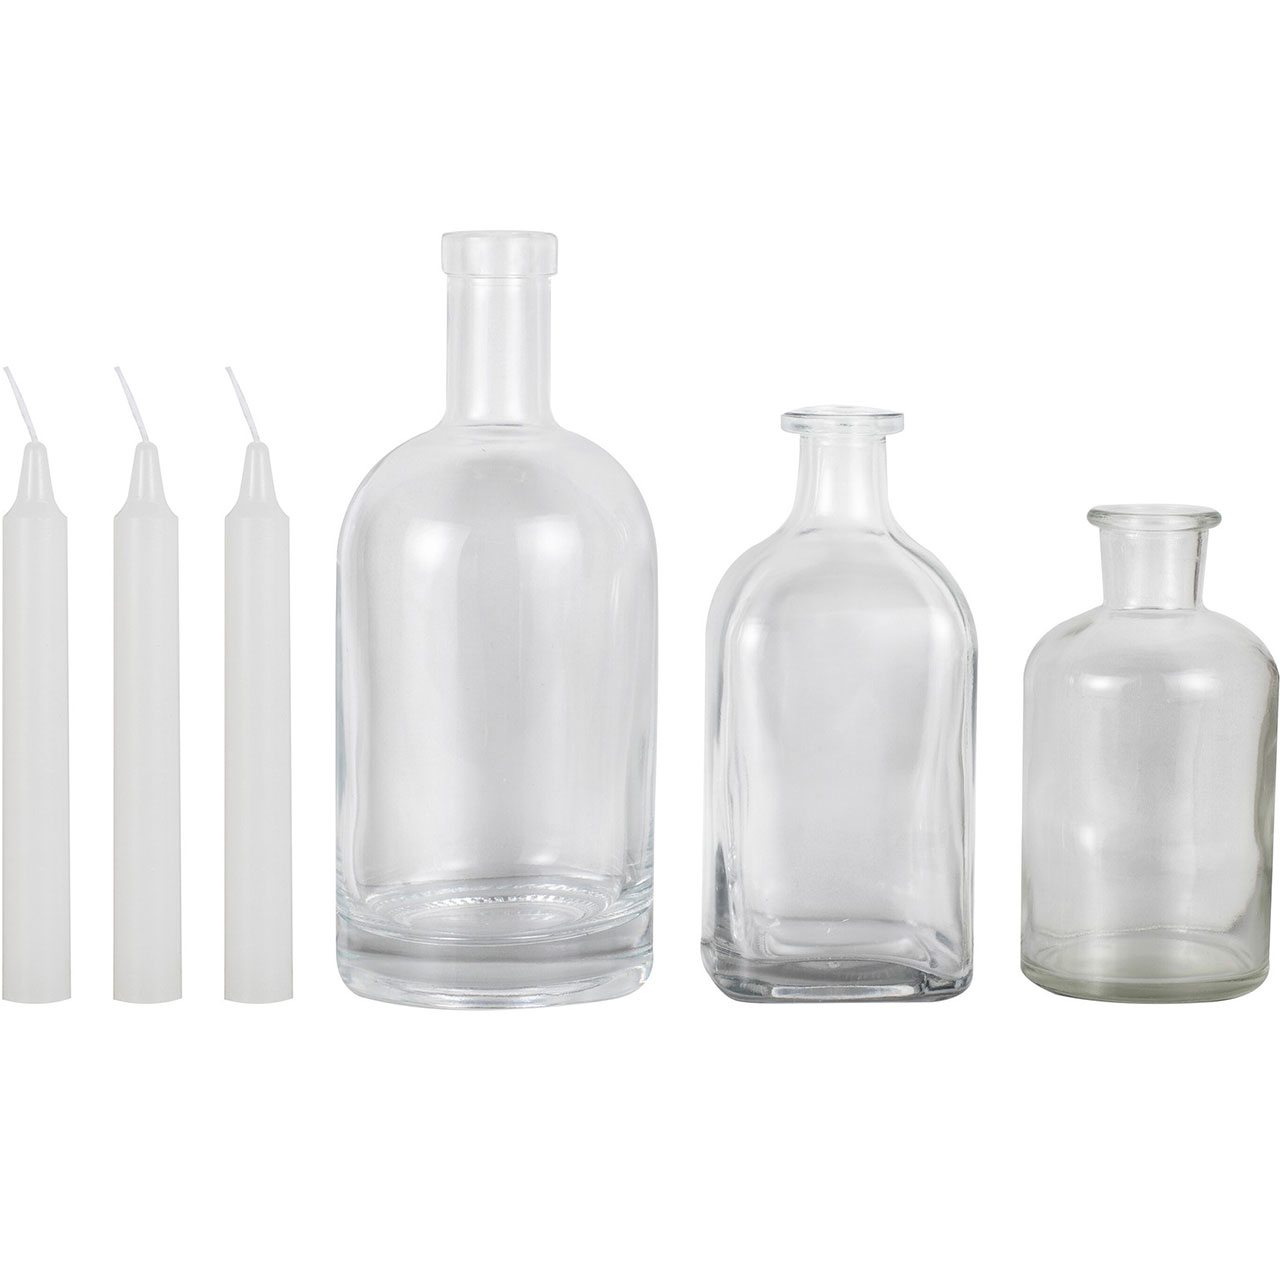 Decorative Candles - Glass Bottles & Candles 